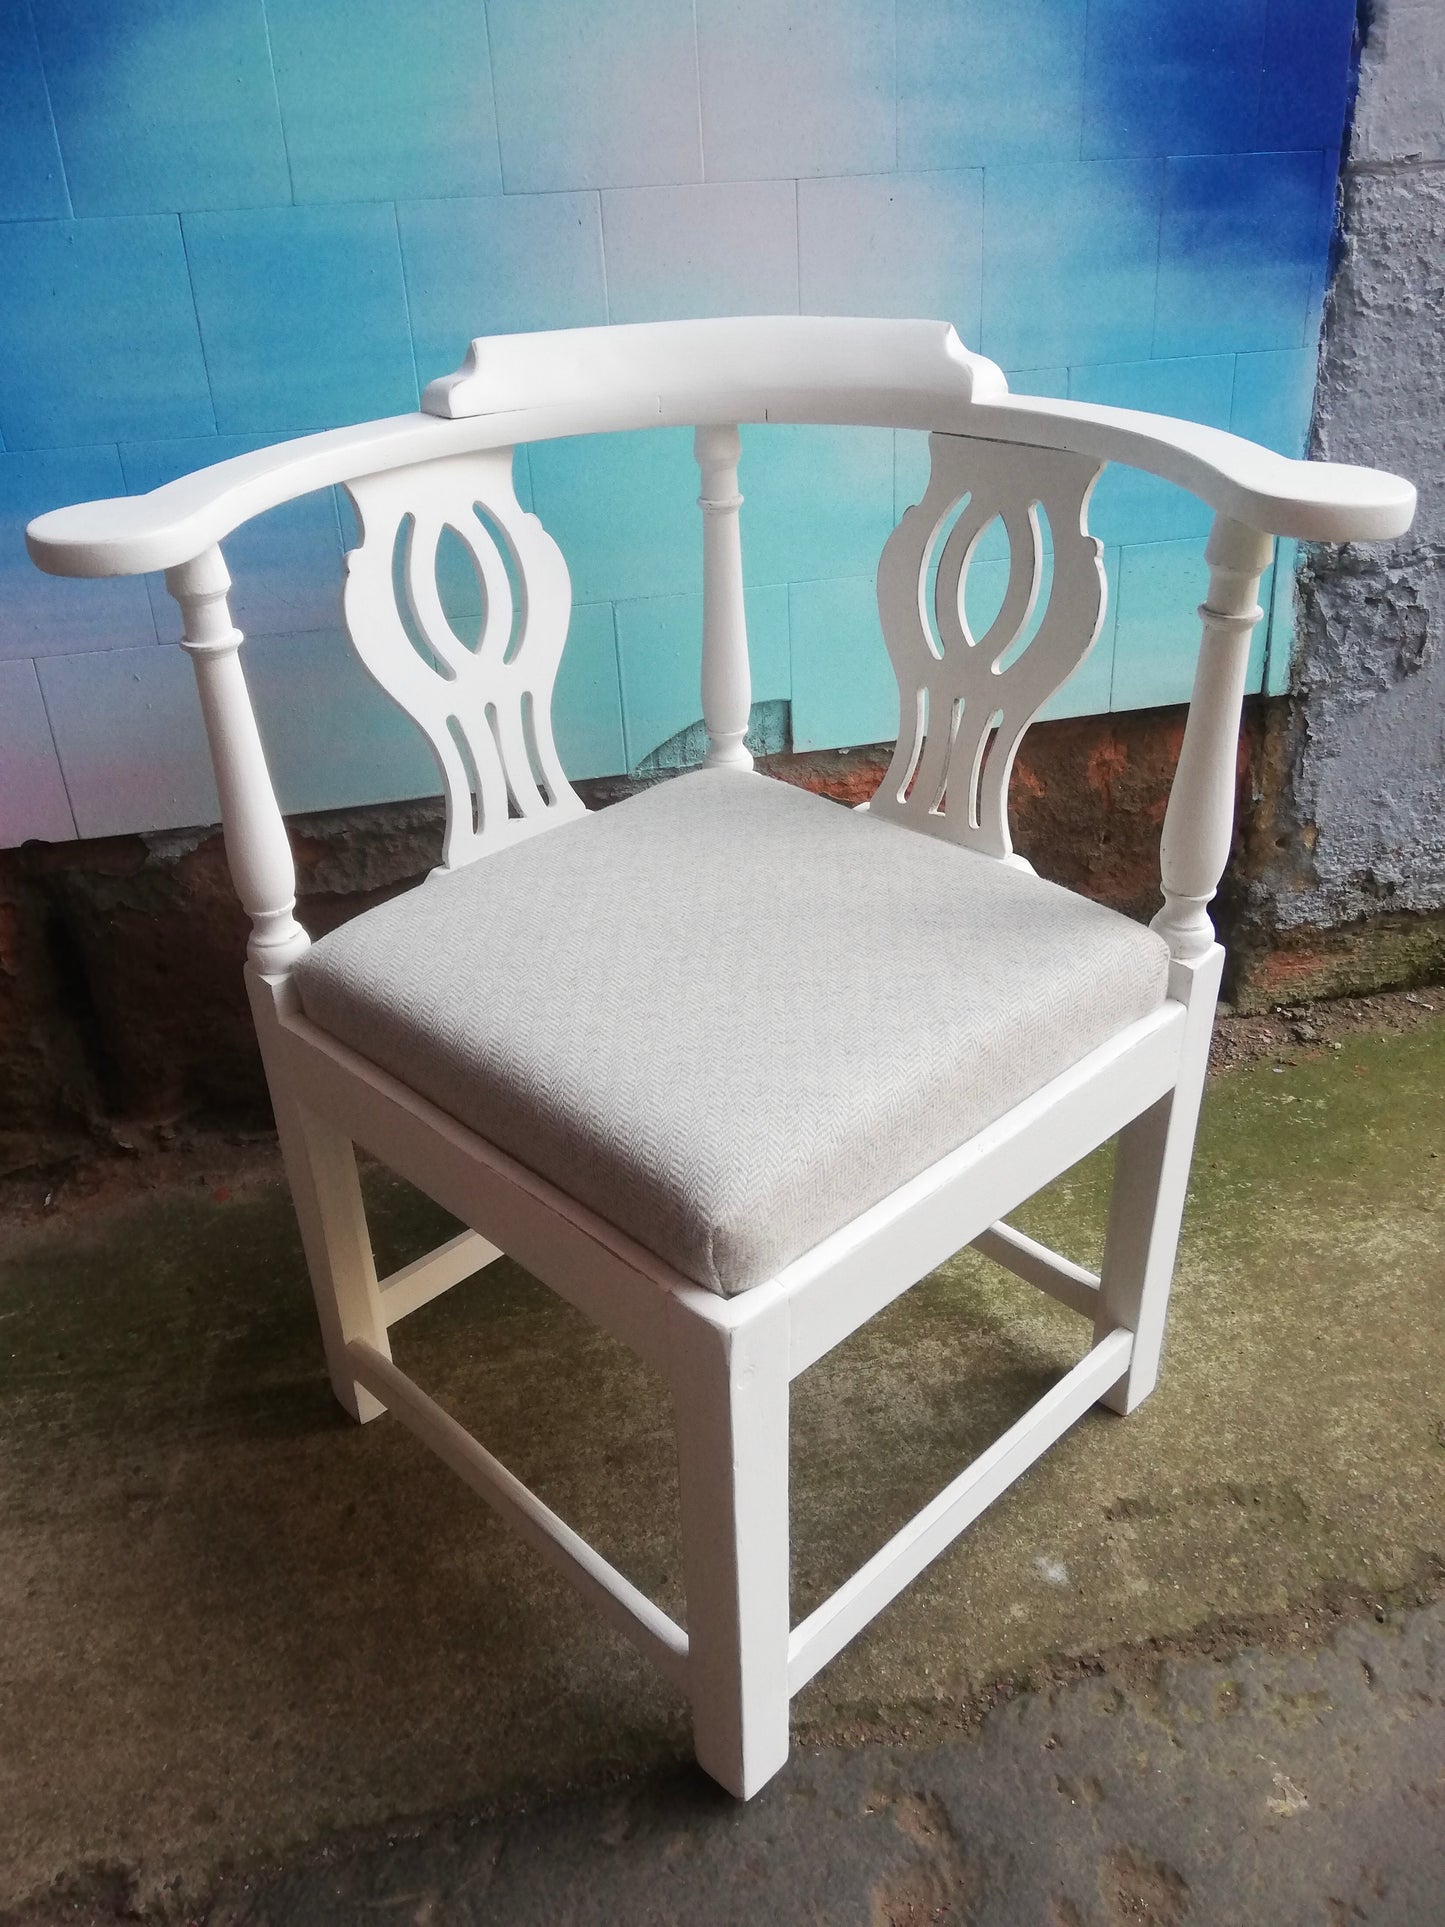 Commission for Anna Martin whitewashed chair